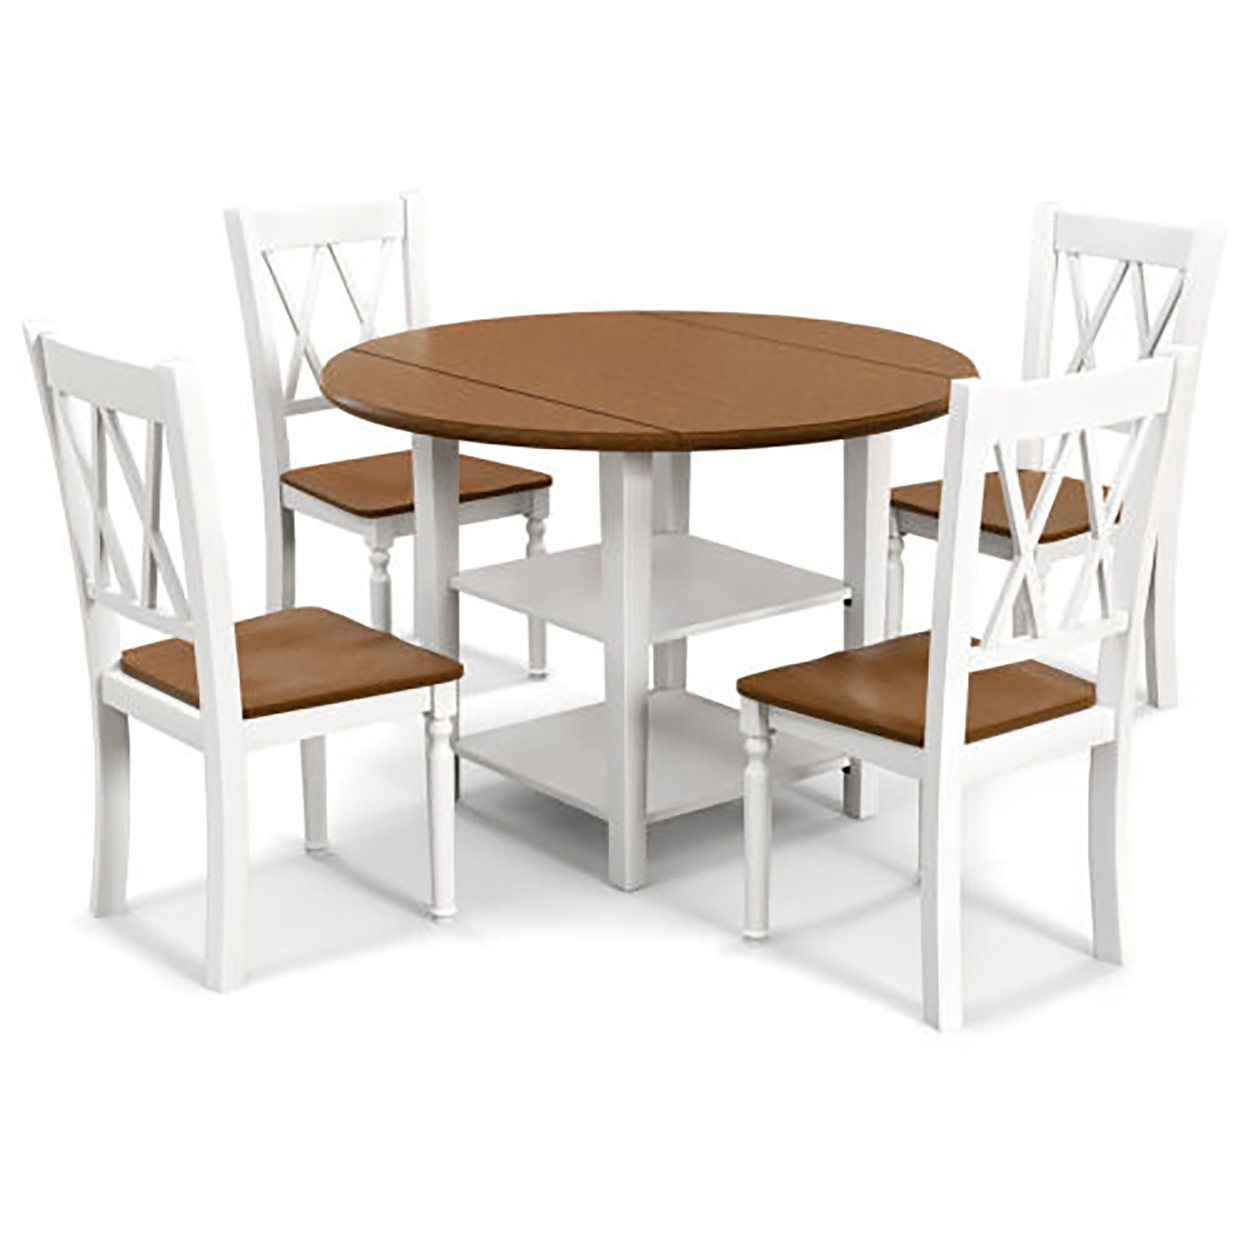 5 Piece Round Dining Kitchen Set W/ Drop Leaf Dining Table Folded & 4 Chairs